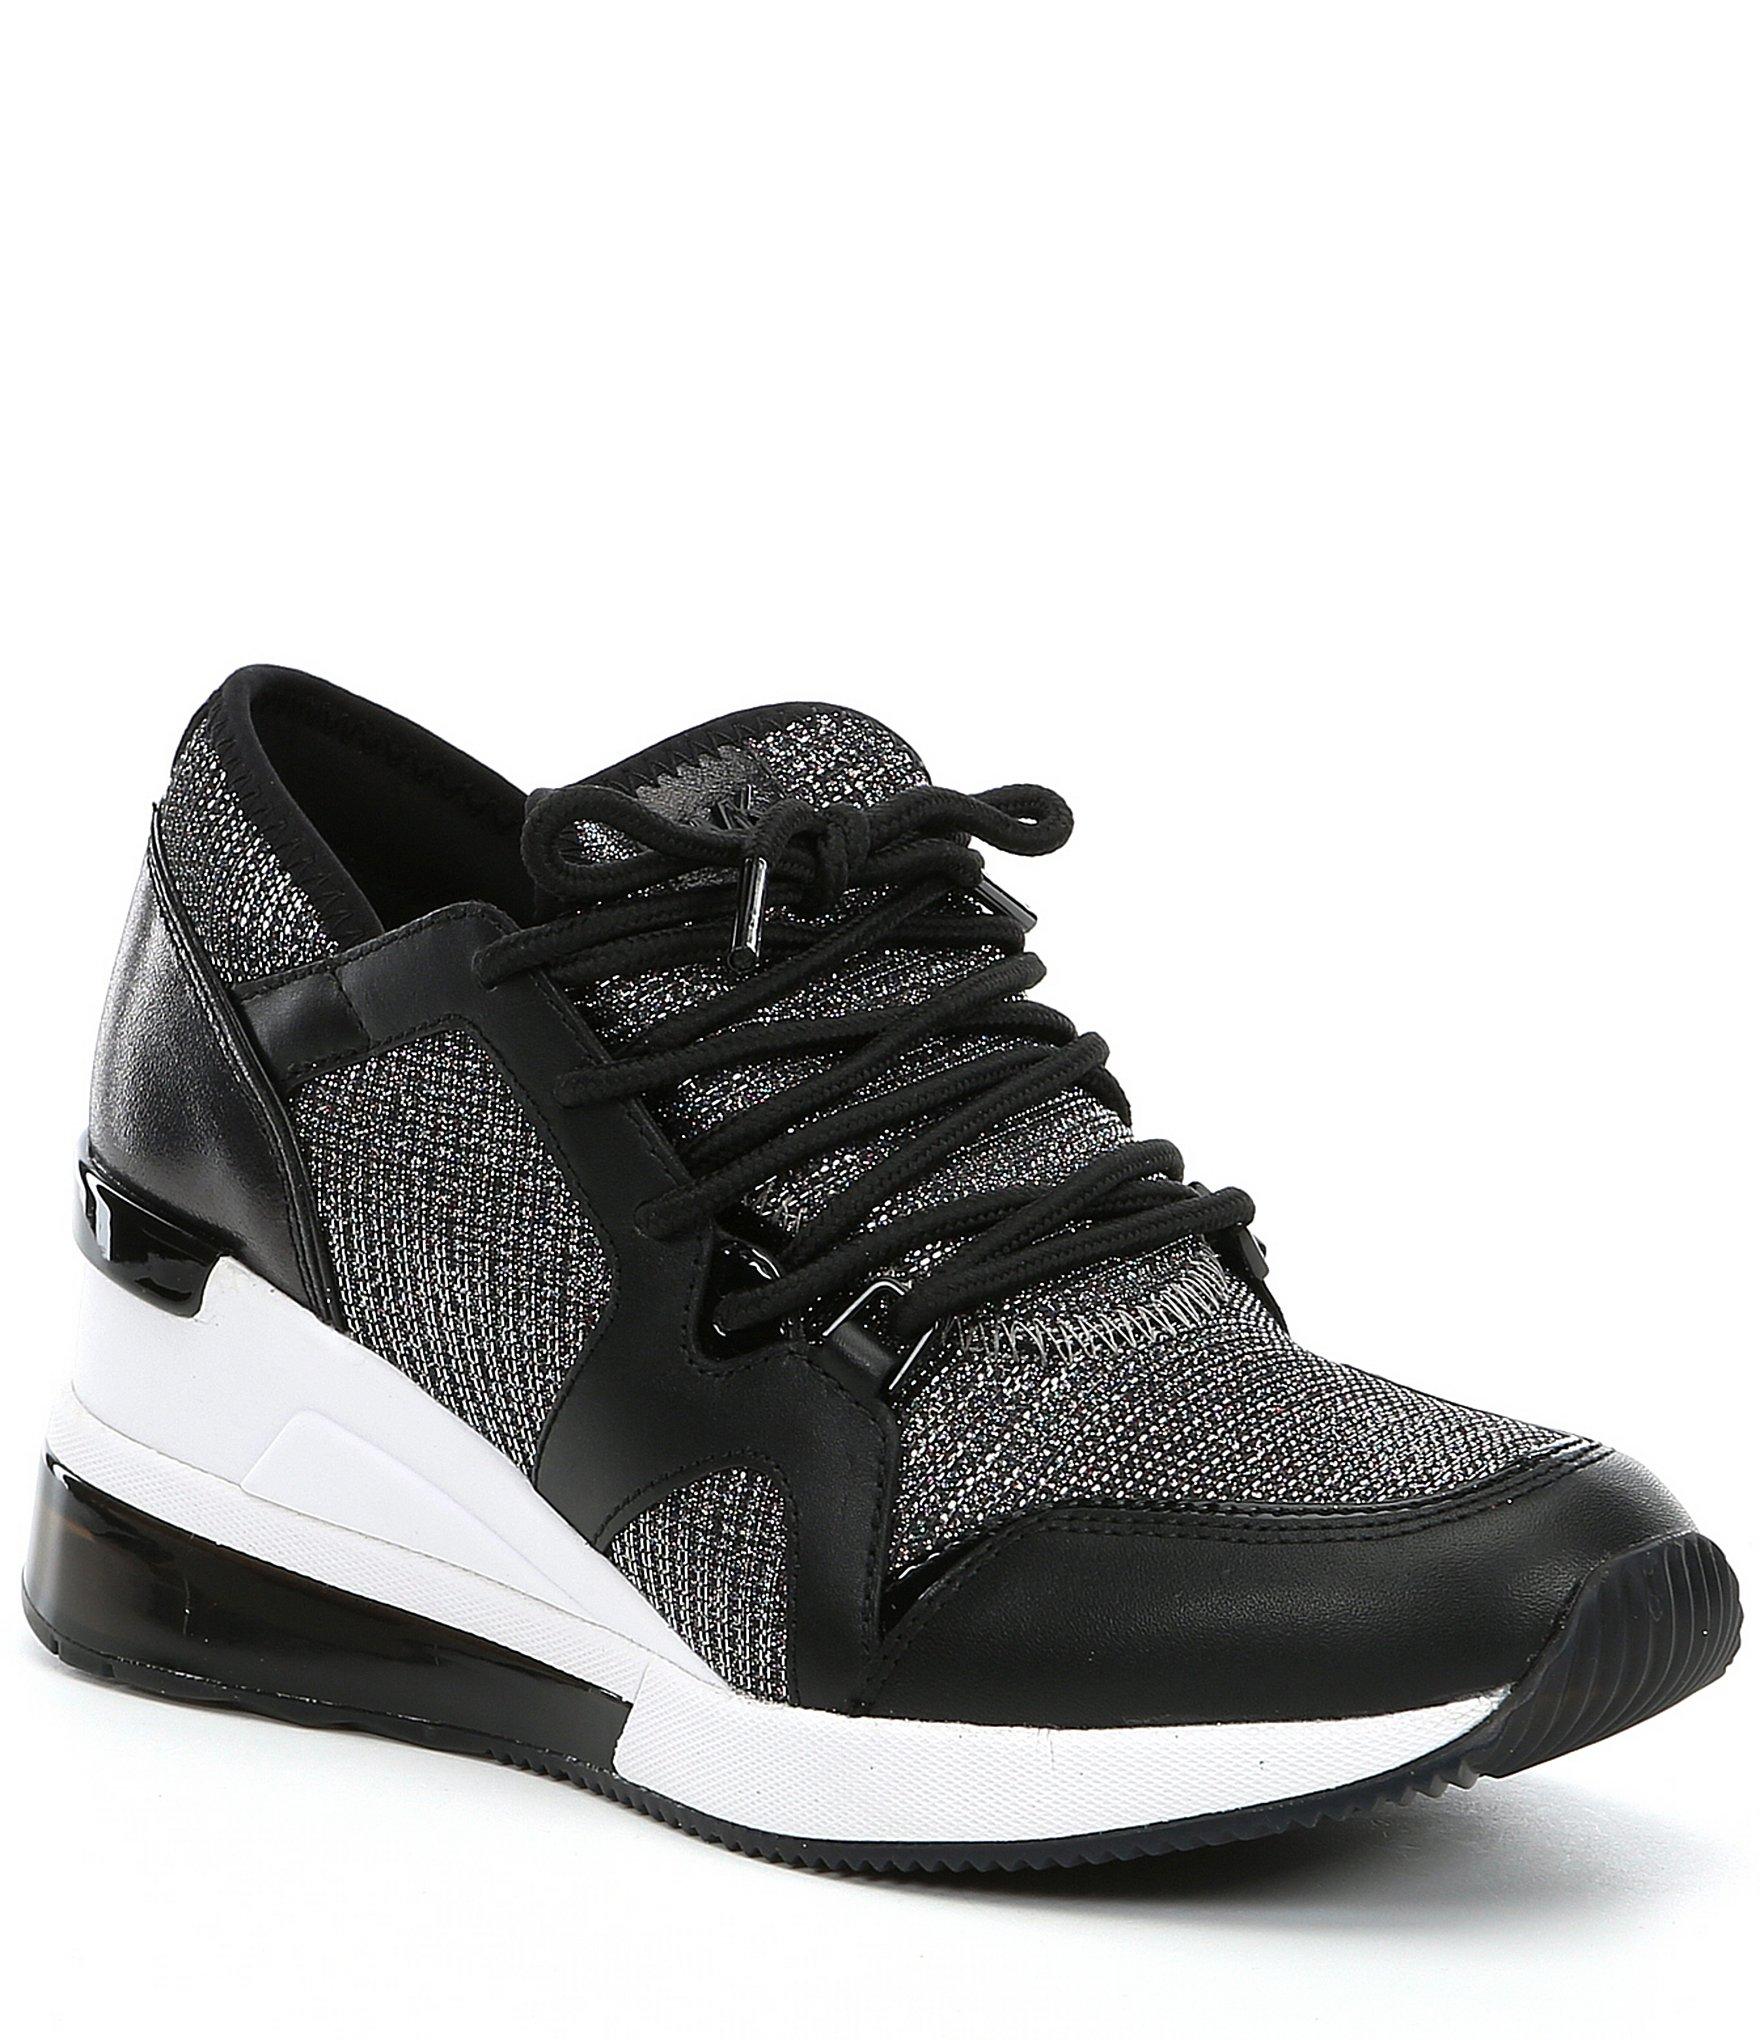 MICHAEL Michael Kors Liv Trainer Extreme Sneakers in Black - Lyst